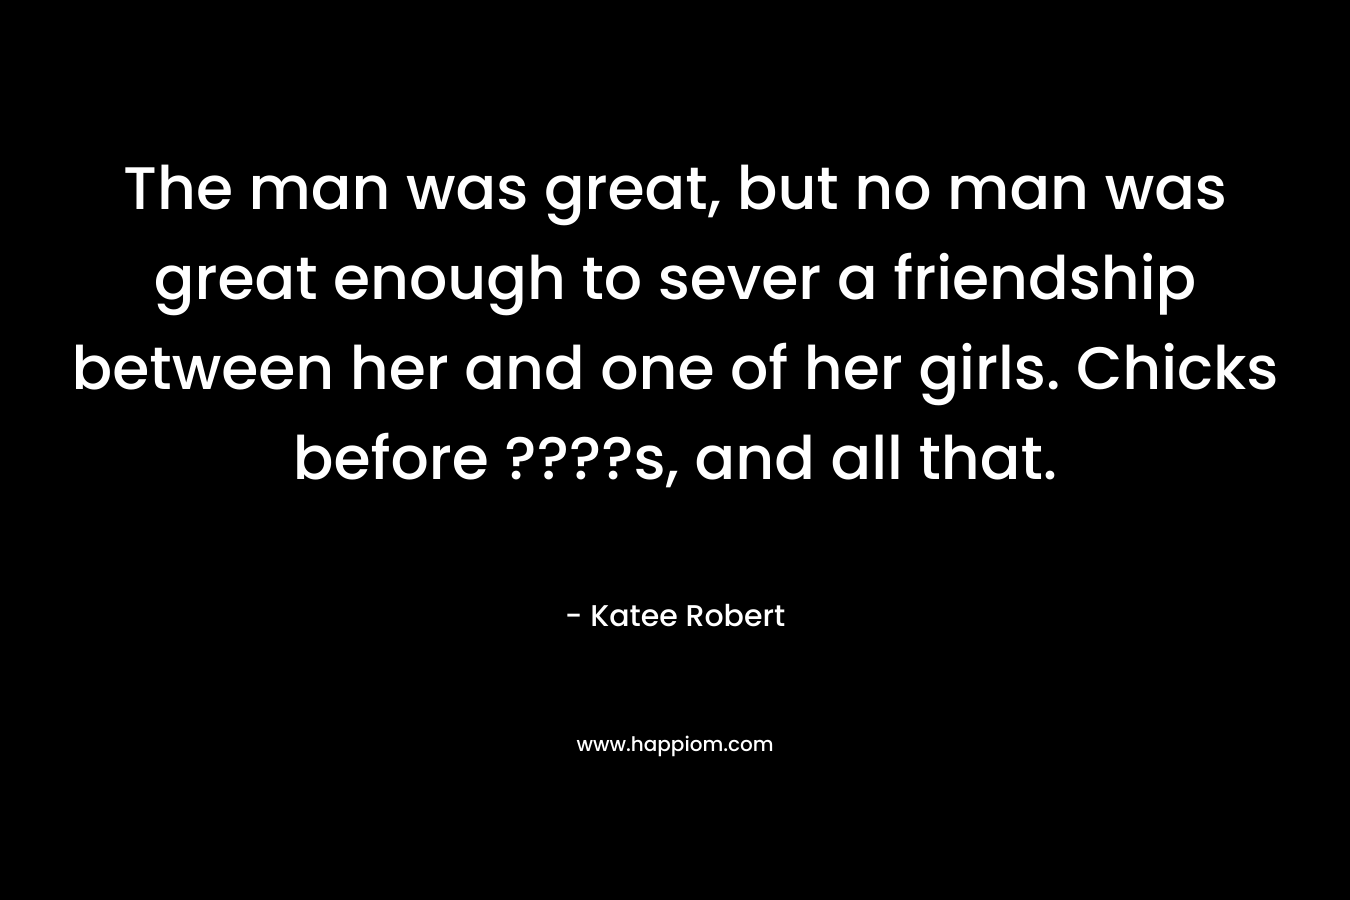 The man was great, but no man was great enough to sever a friendship between her and one of her girls. Chicks before ????s, and all that.